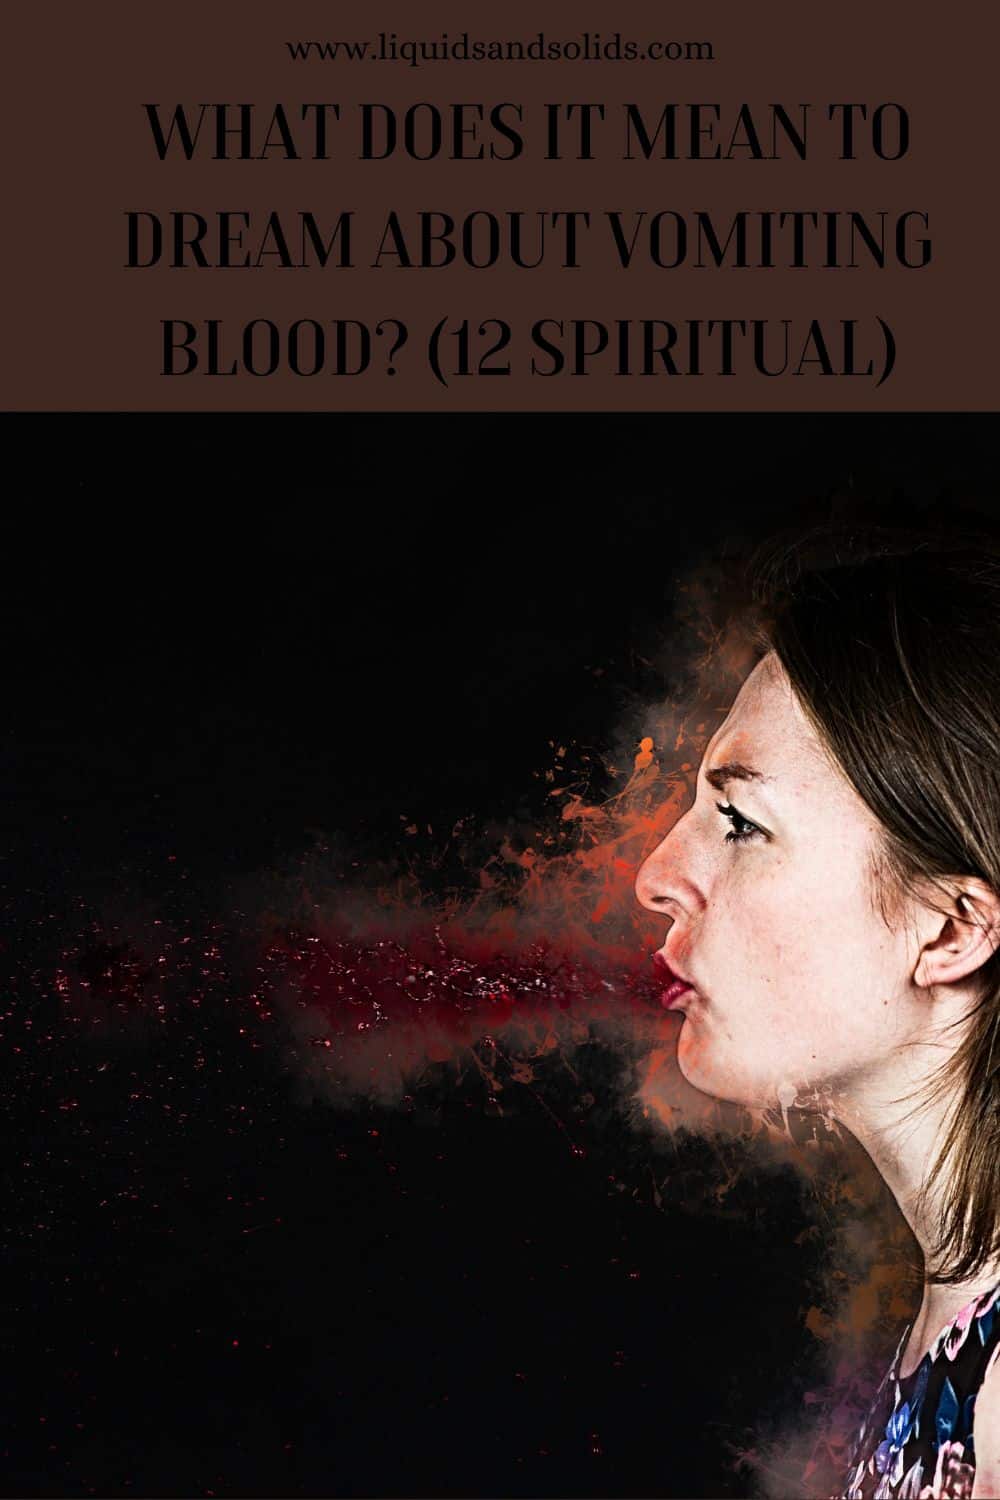 What Does It Mean To Dream About Vomiting Blood? (12 Spiritual)